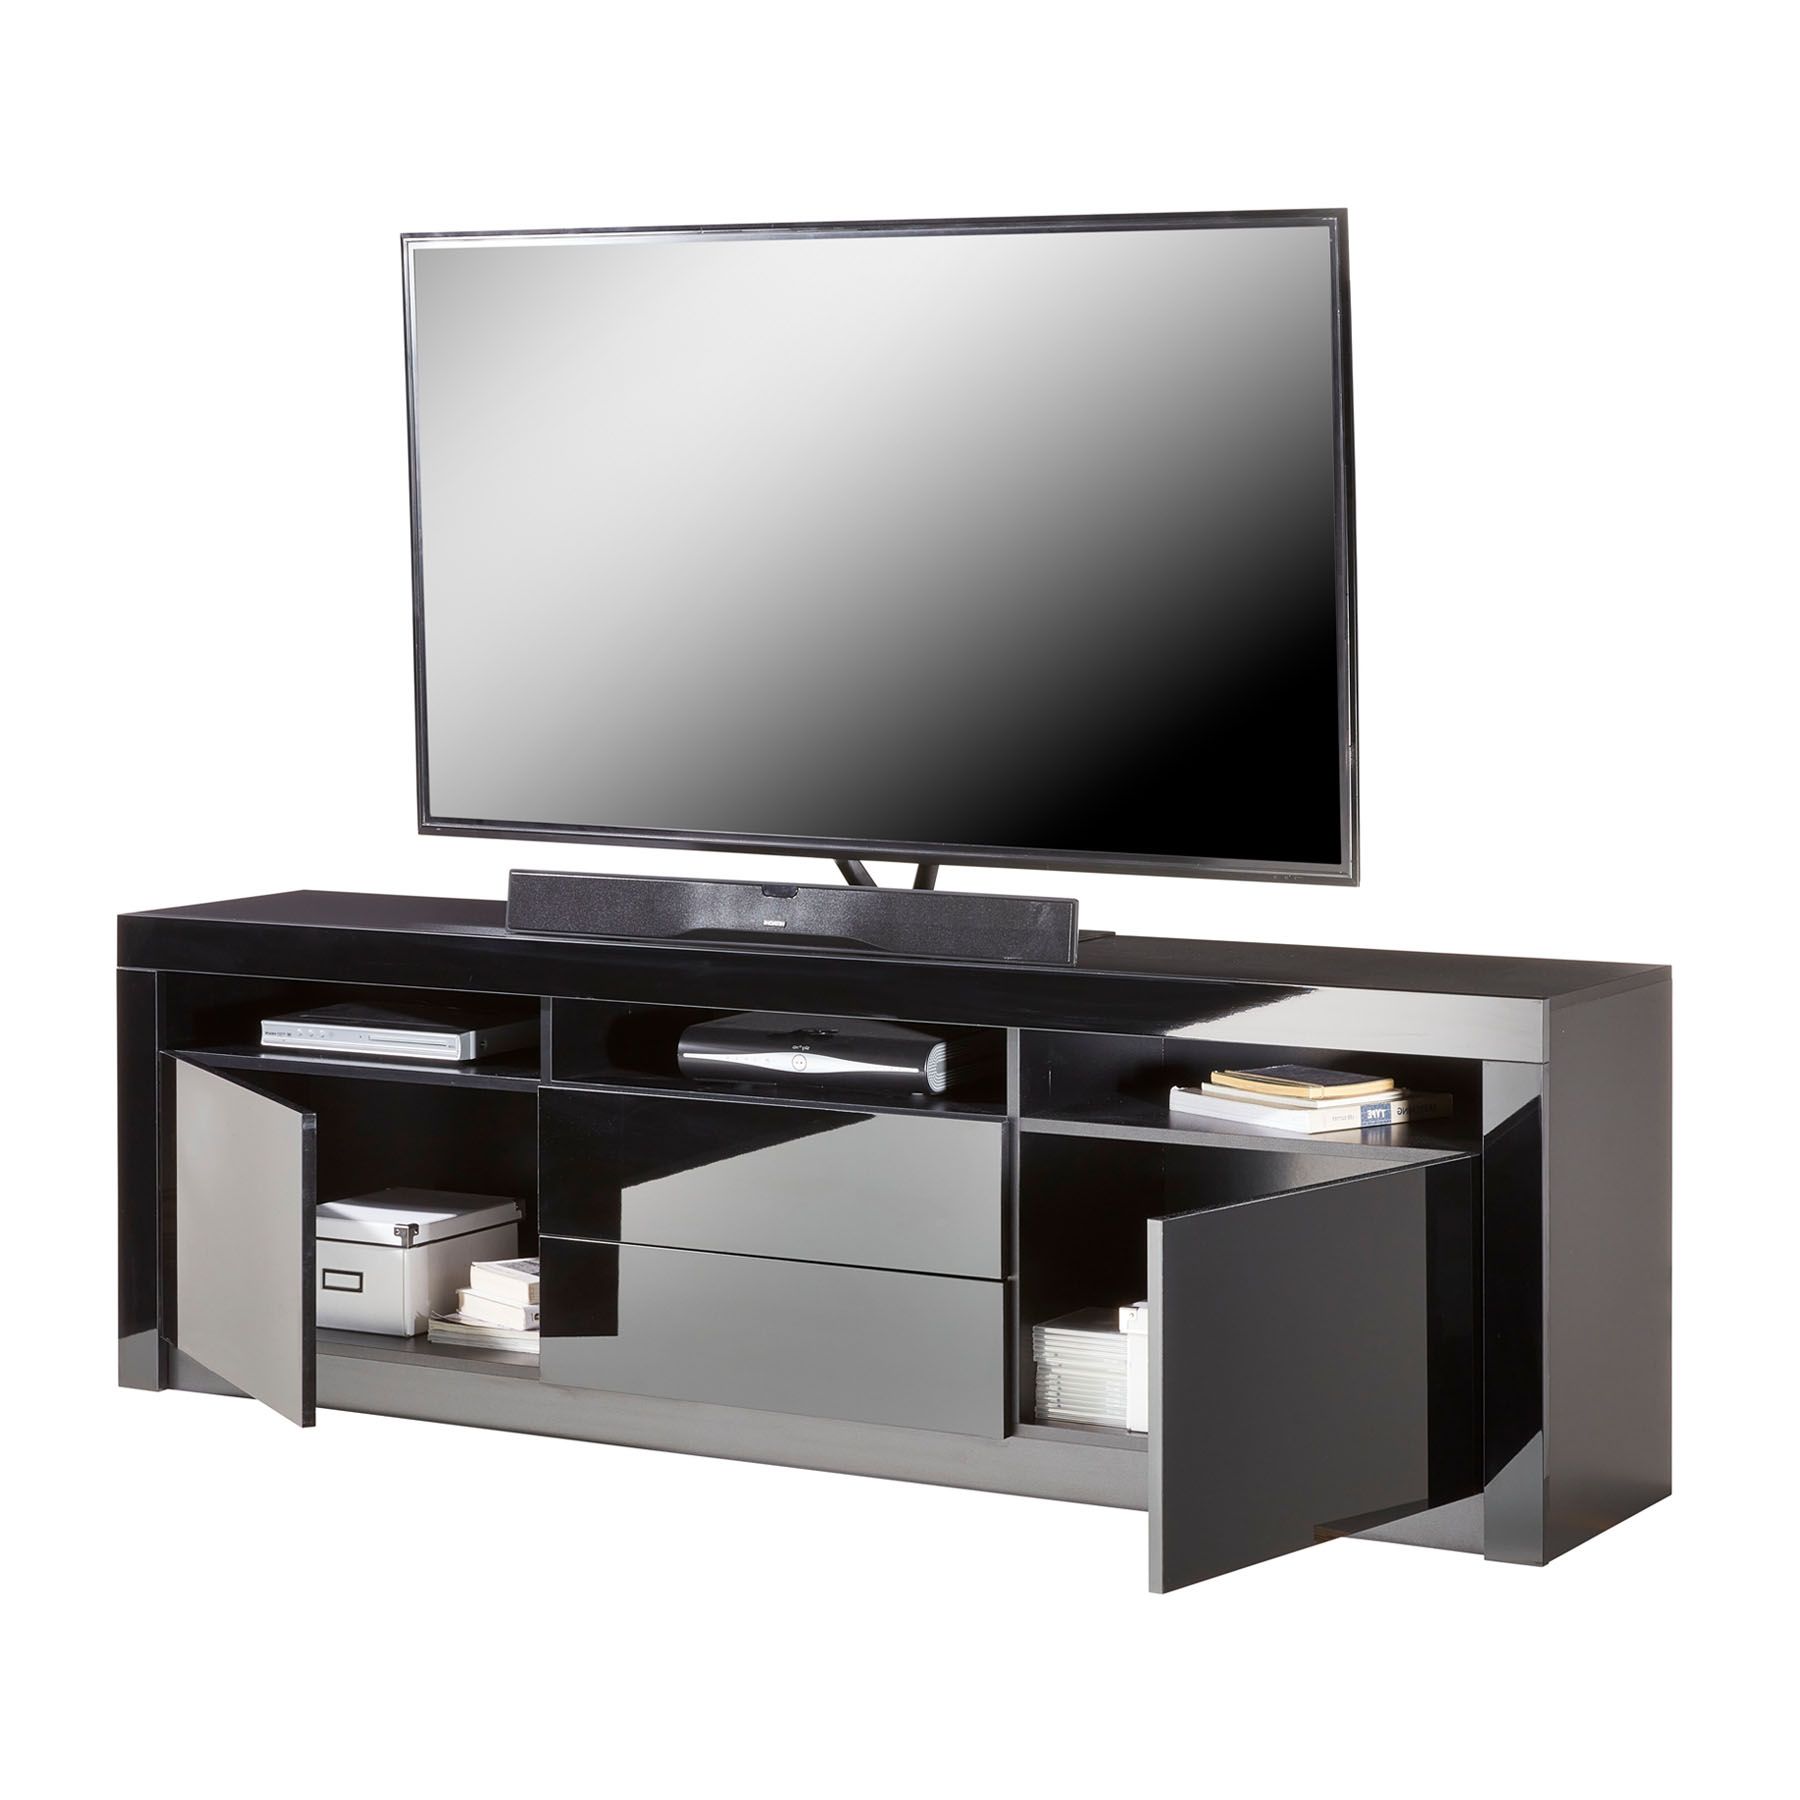 Black Tv Cabinet With Drawers & Rgb Lights For Up To 85″ Screens Throughout Black Rgb Entertainment Centers (Gallery 20 of 20)